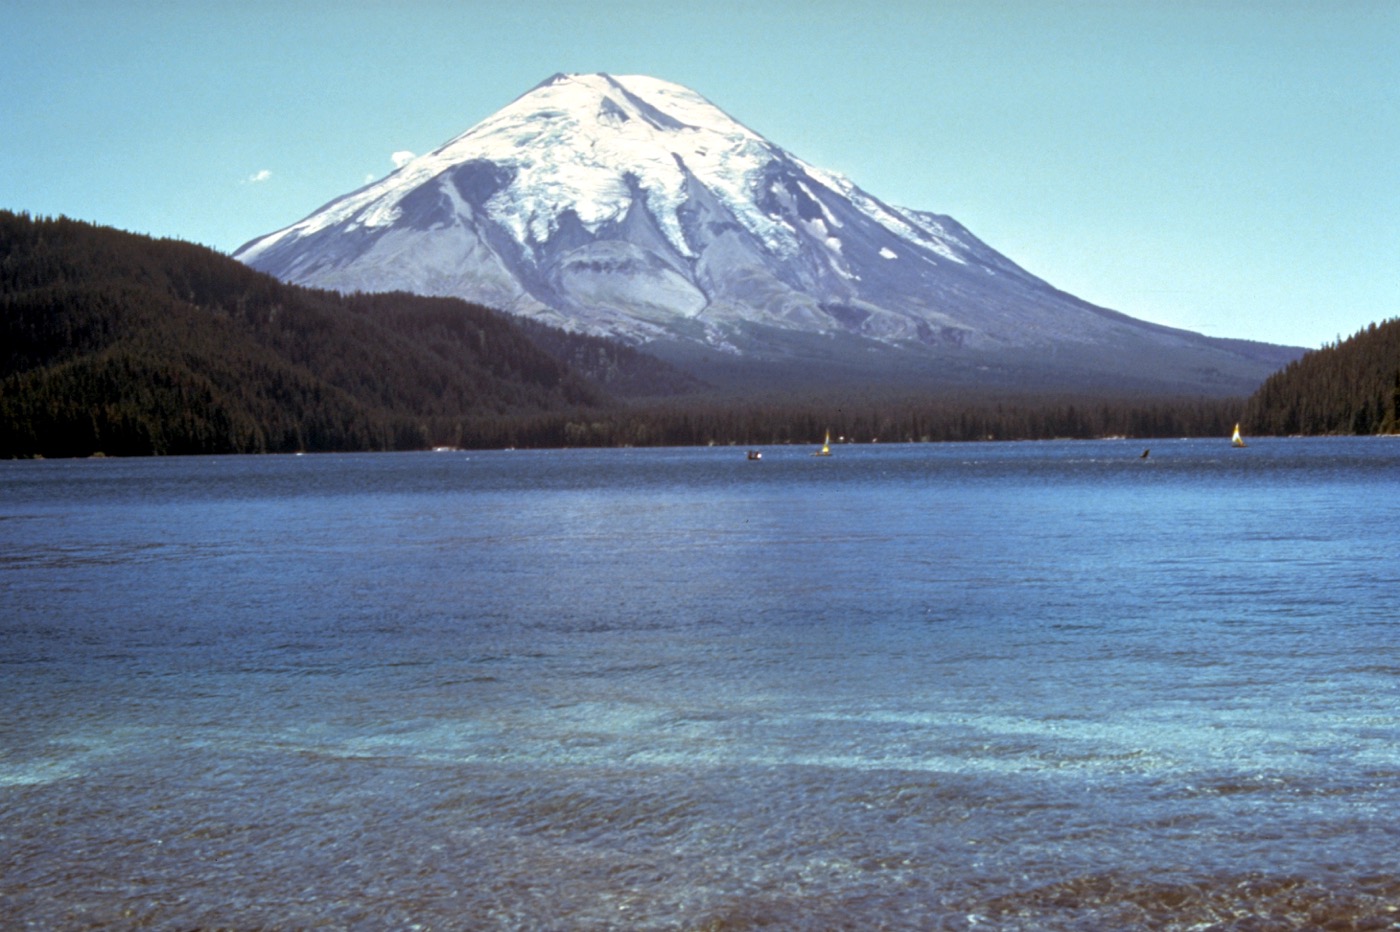 A large mountain with a lake in the foreground